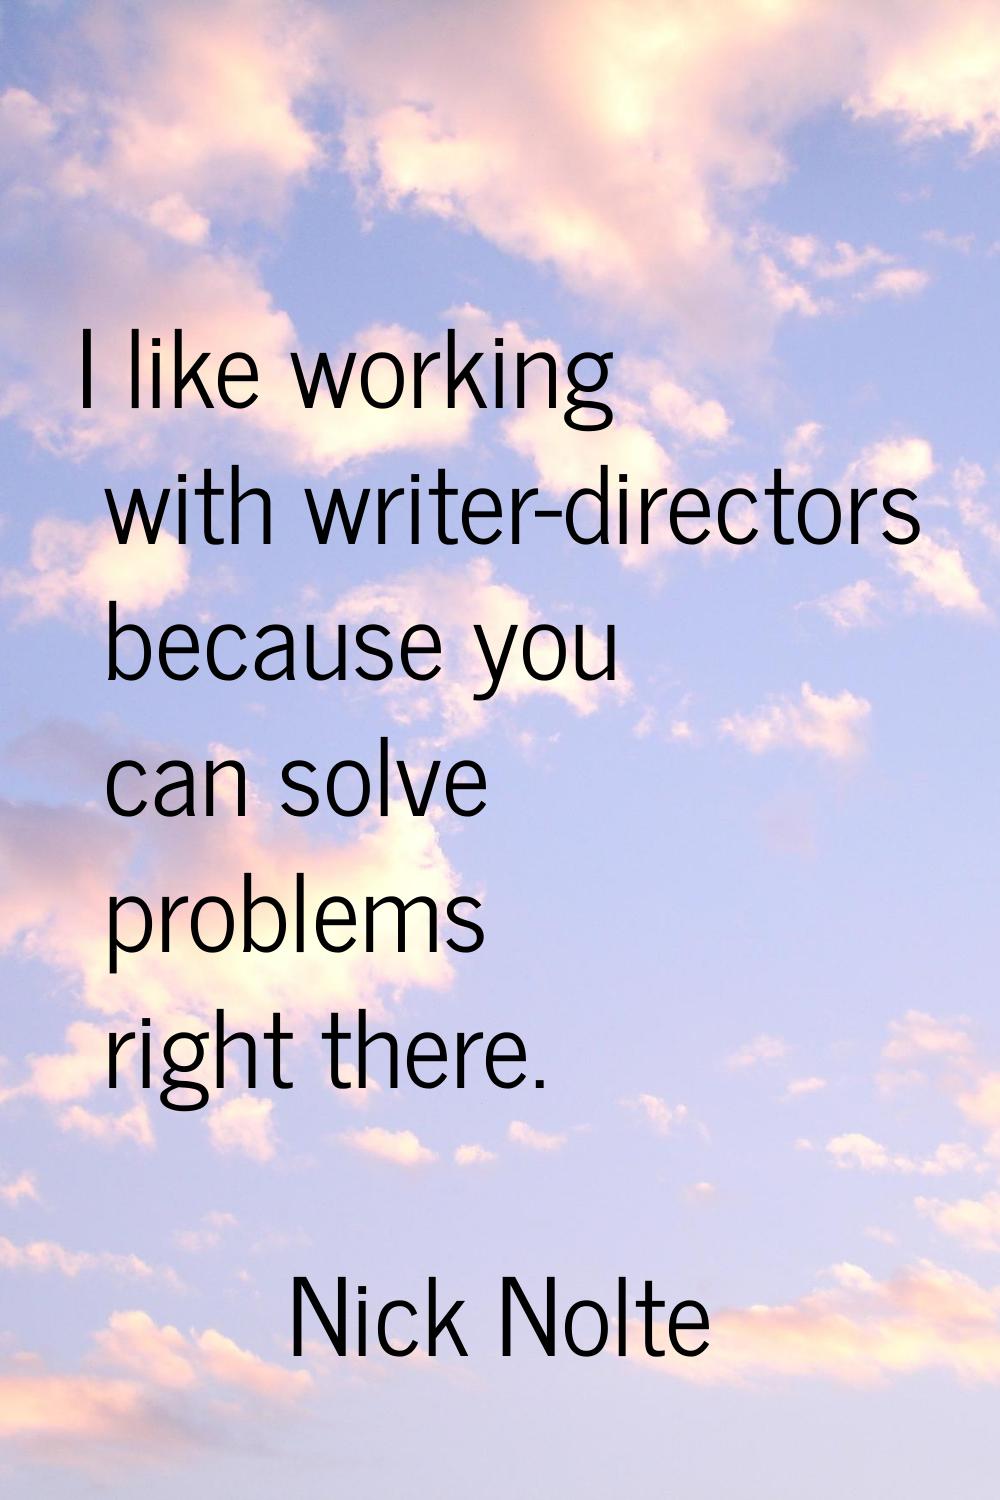 I like working with writer-directors because you can solve problems right there.